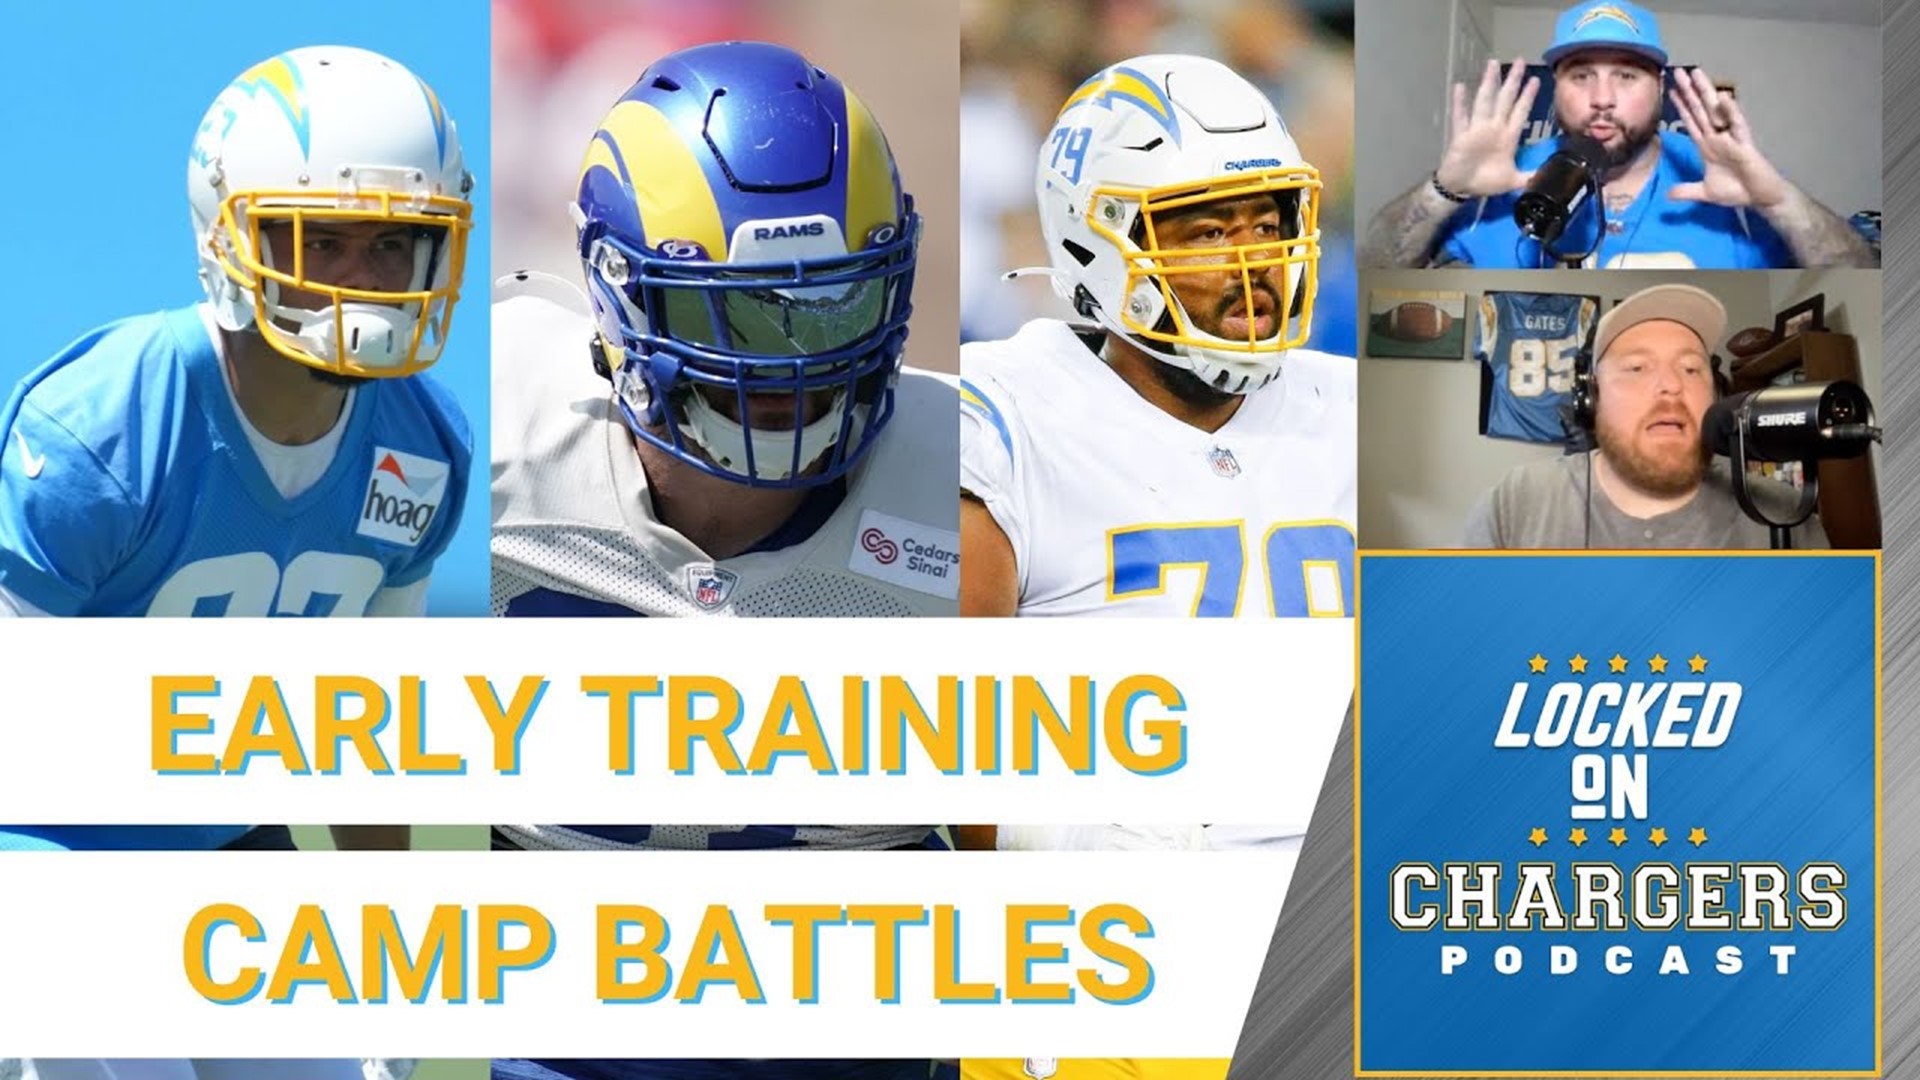 Storm Norton vs Trey Pipkins, Bryce Callahan vs Michael Davis, with training camp around the corner some starting spot have to be earned on the Chargers roster.